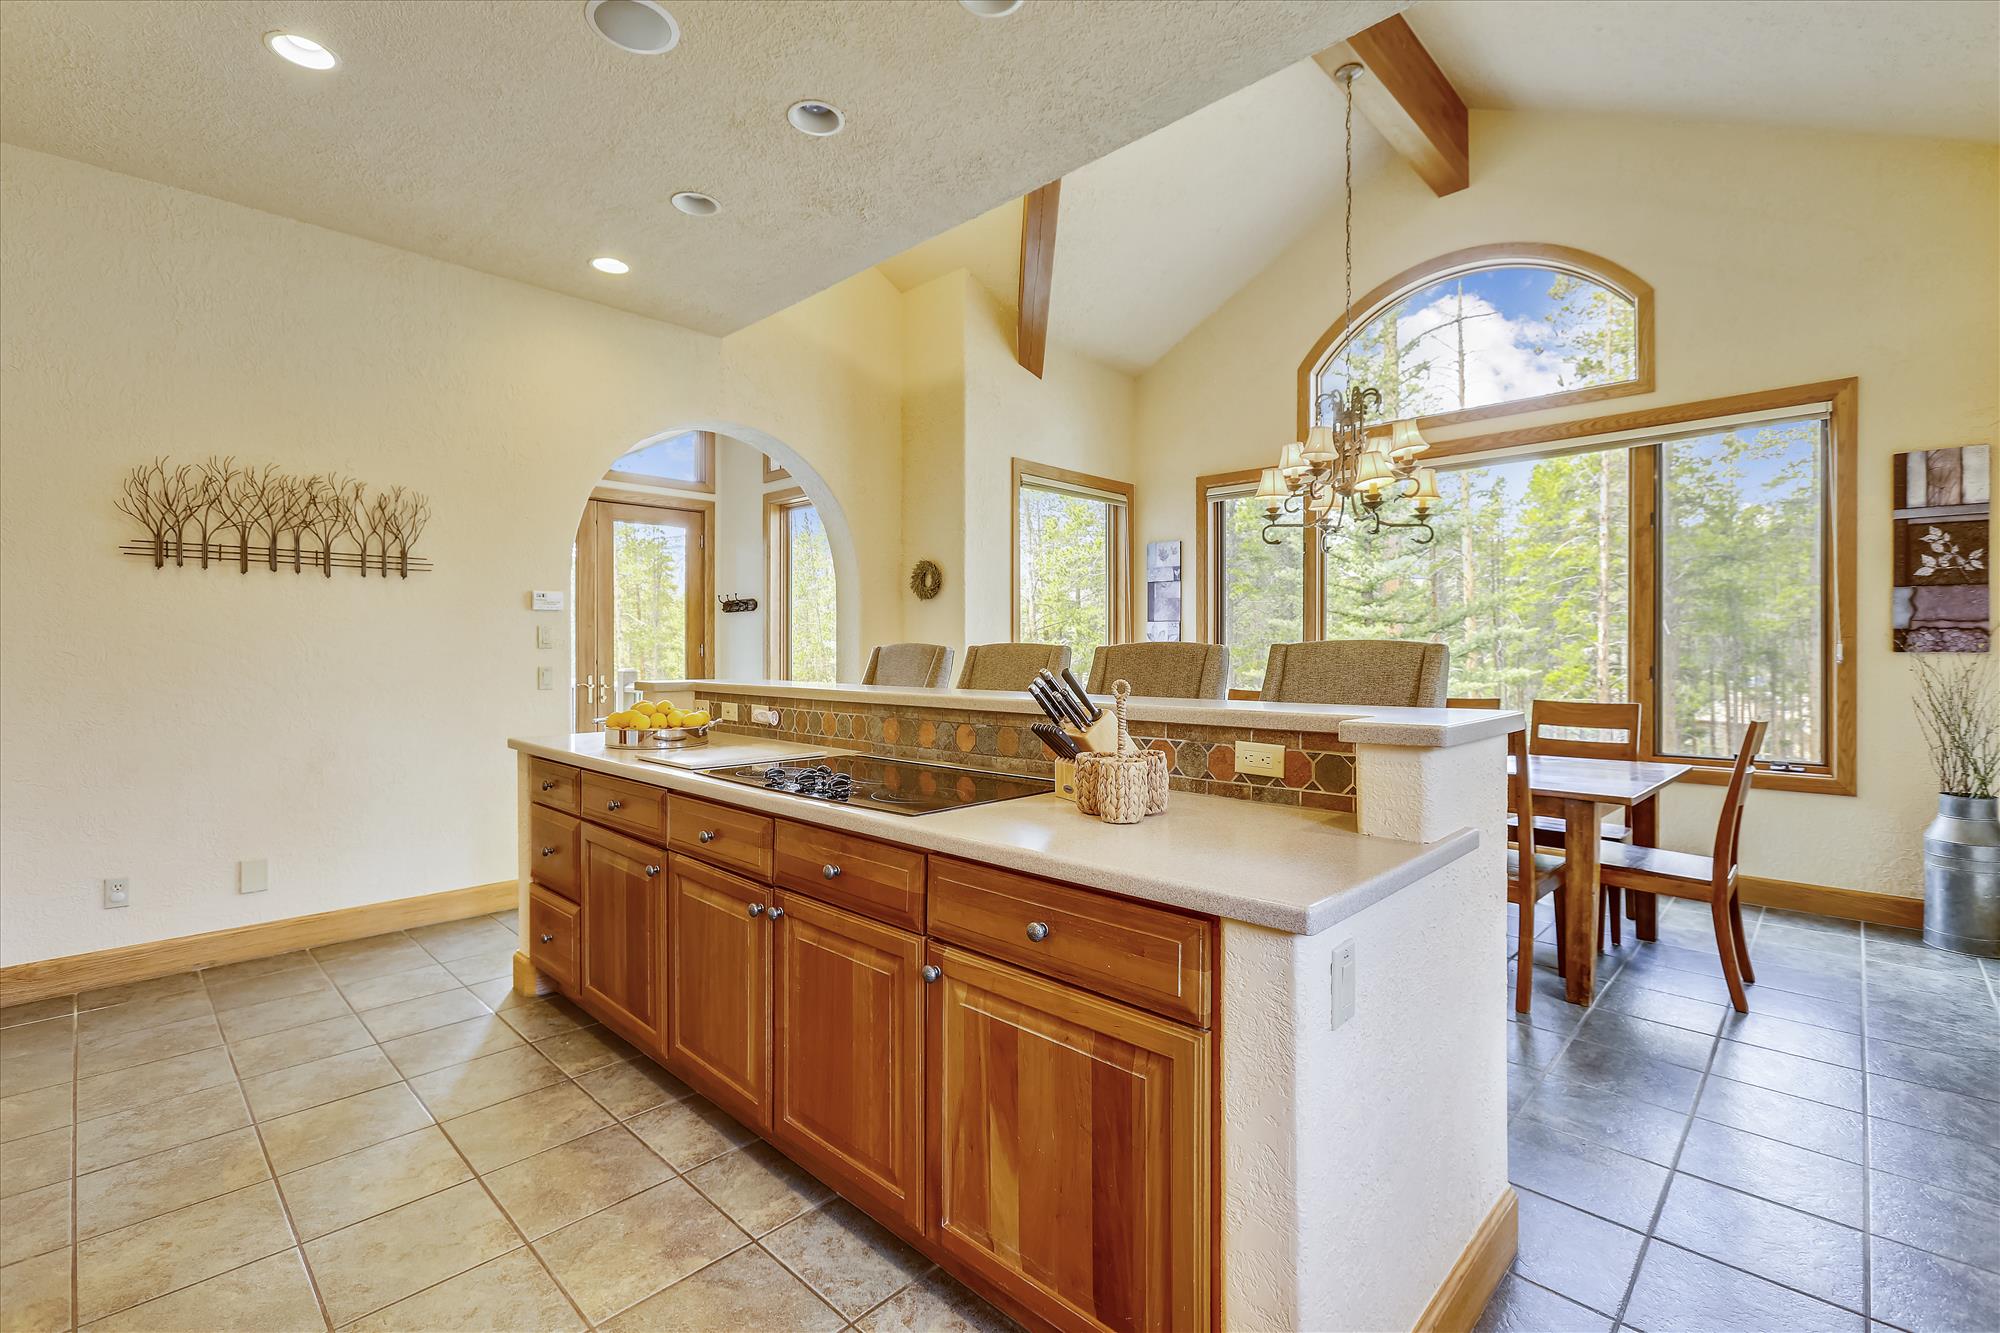 Kitchen island with stovetop and bar seating - Evergreen Lodge Breckenridge Vacation Rental